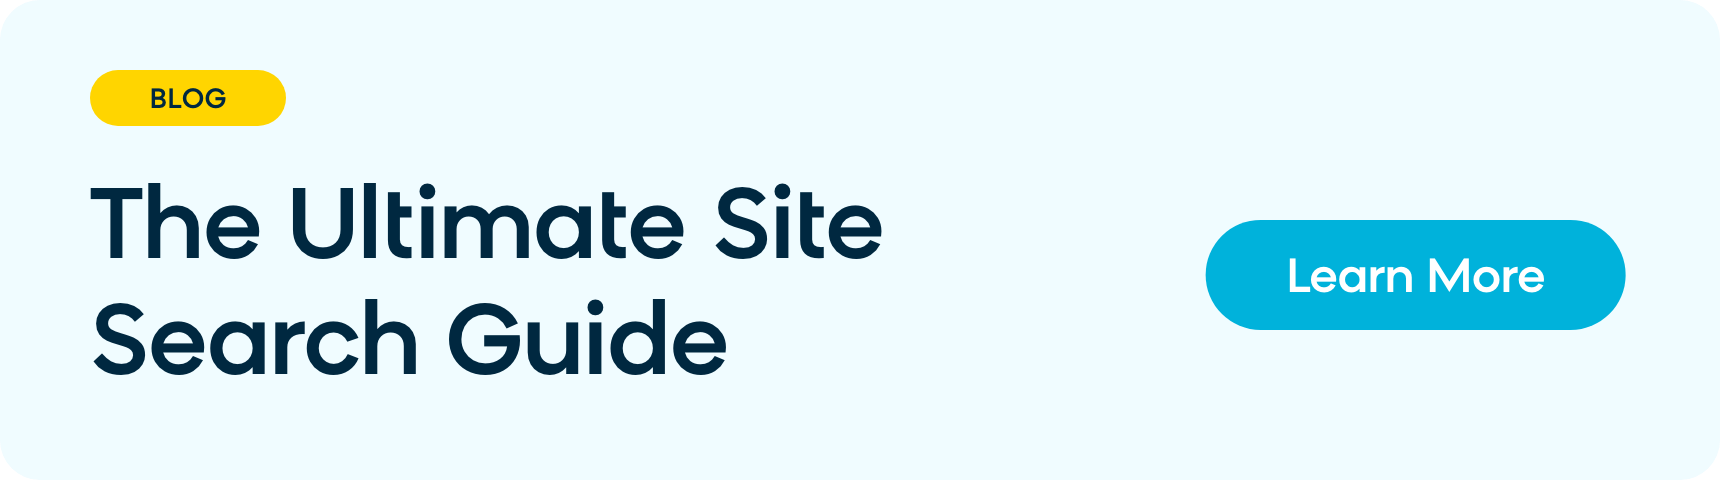 The Ultimate Site Search Guide blog post